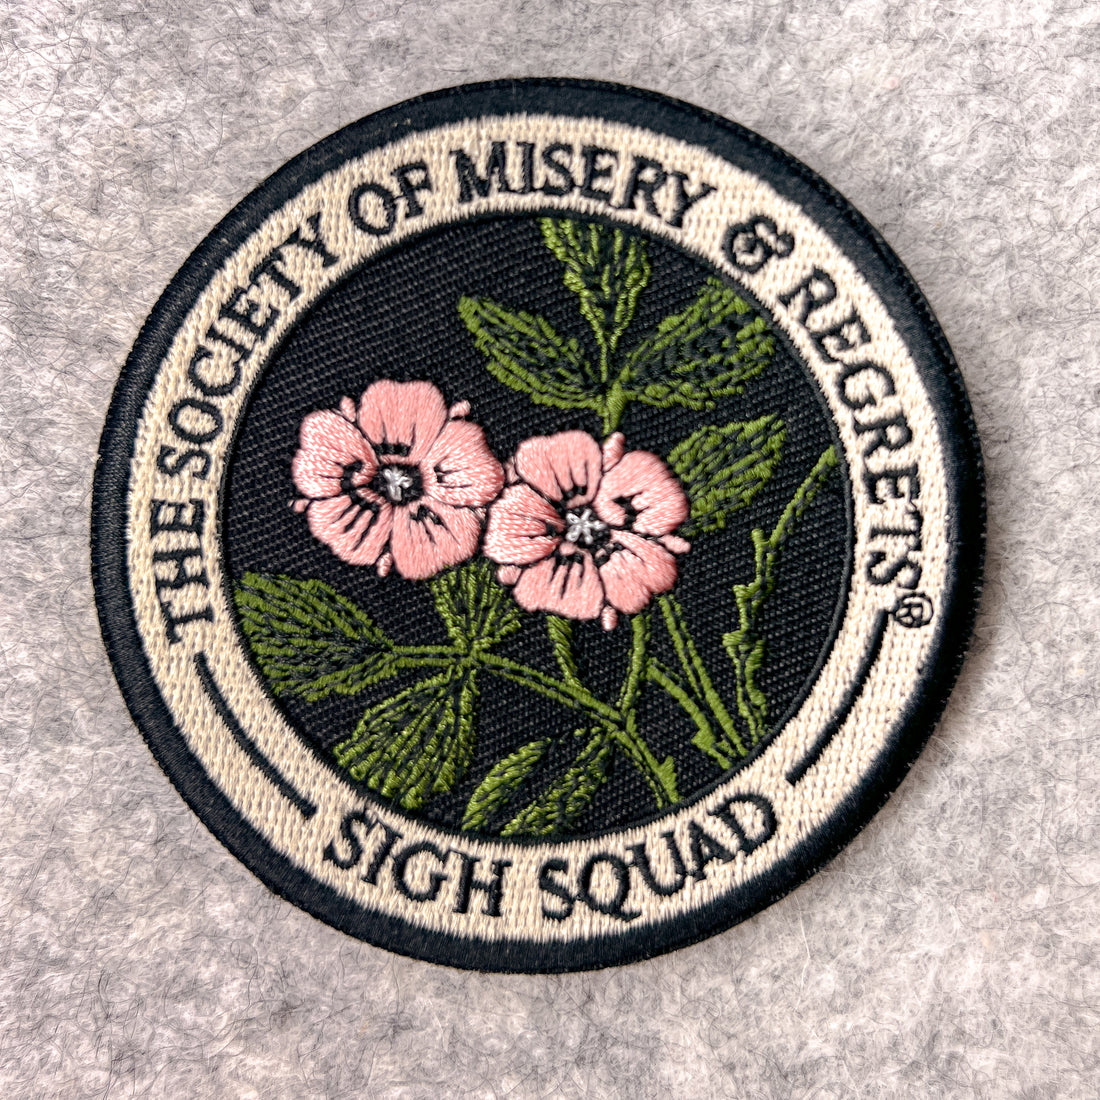 Society of Regrets Patch